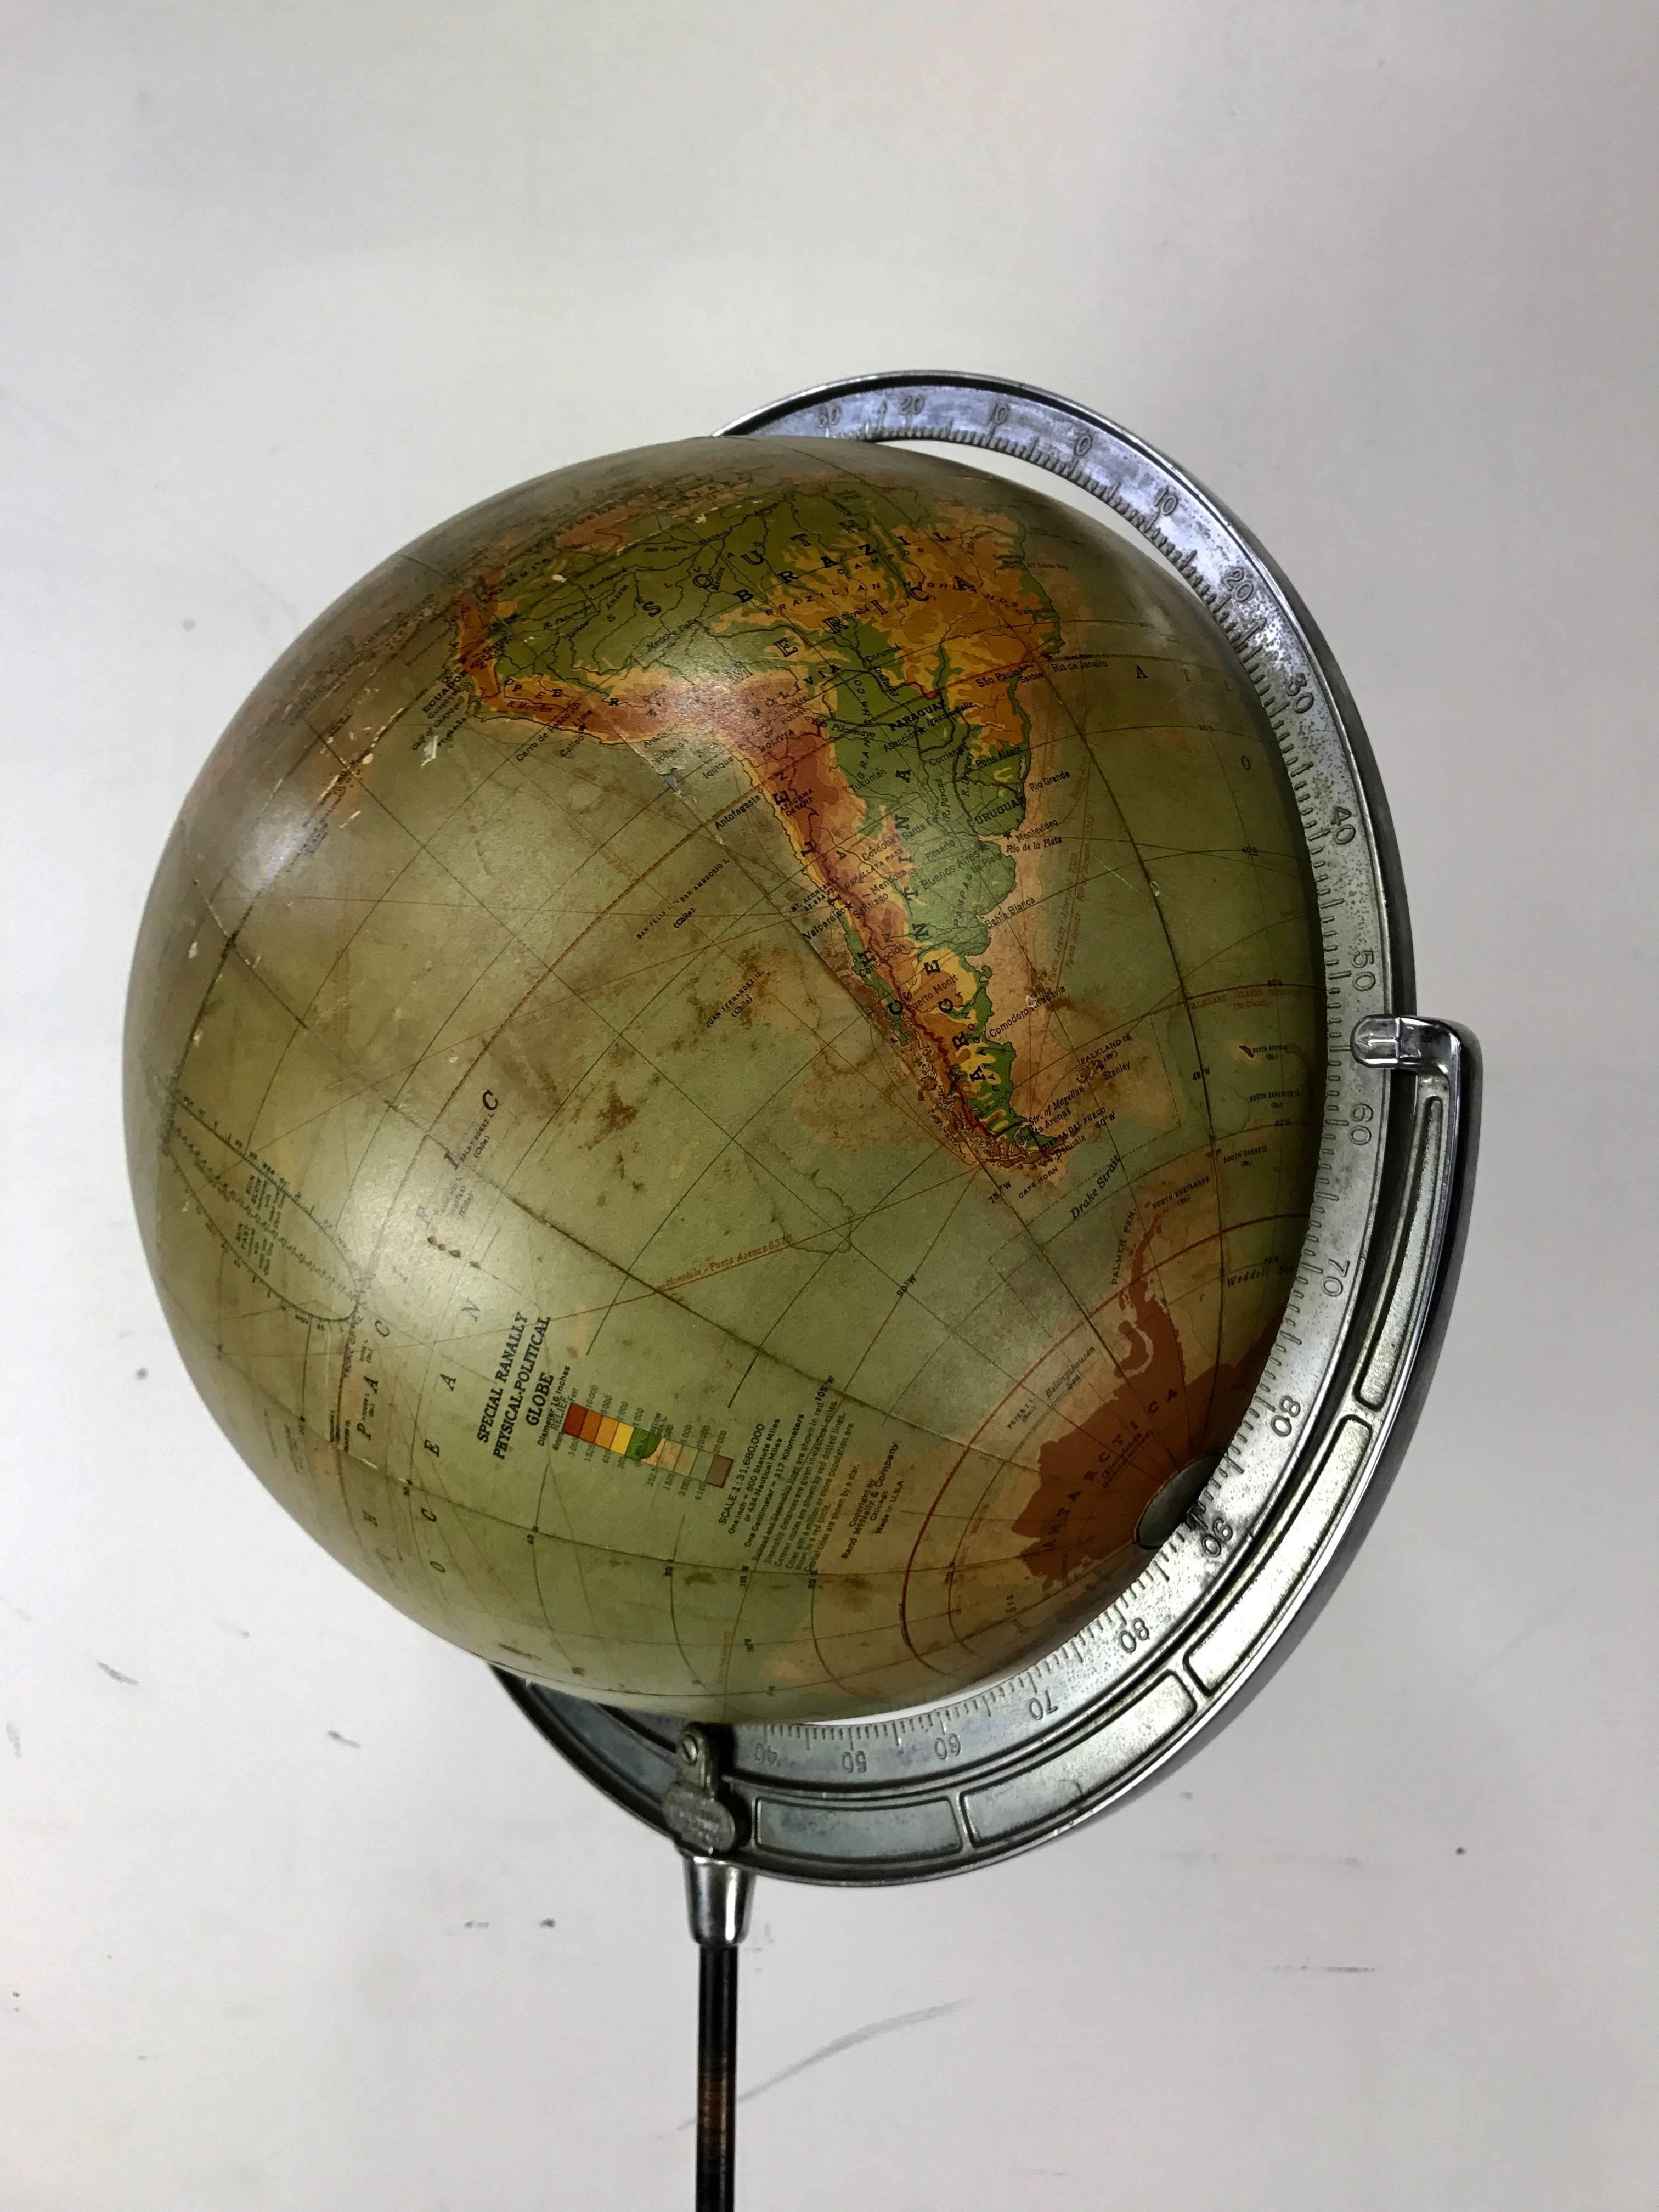 Telescoping Adjustable World Globe by Rand McNally, Chicago In Good Condition For Sale In Buffalo, NY